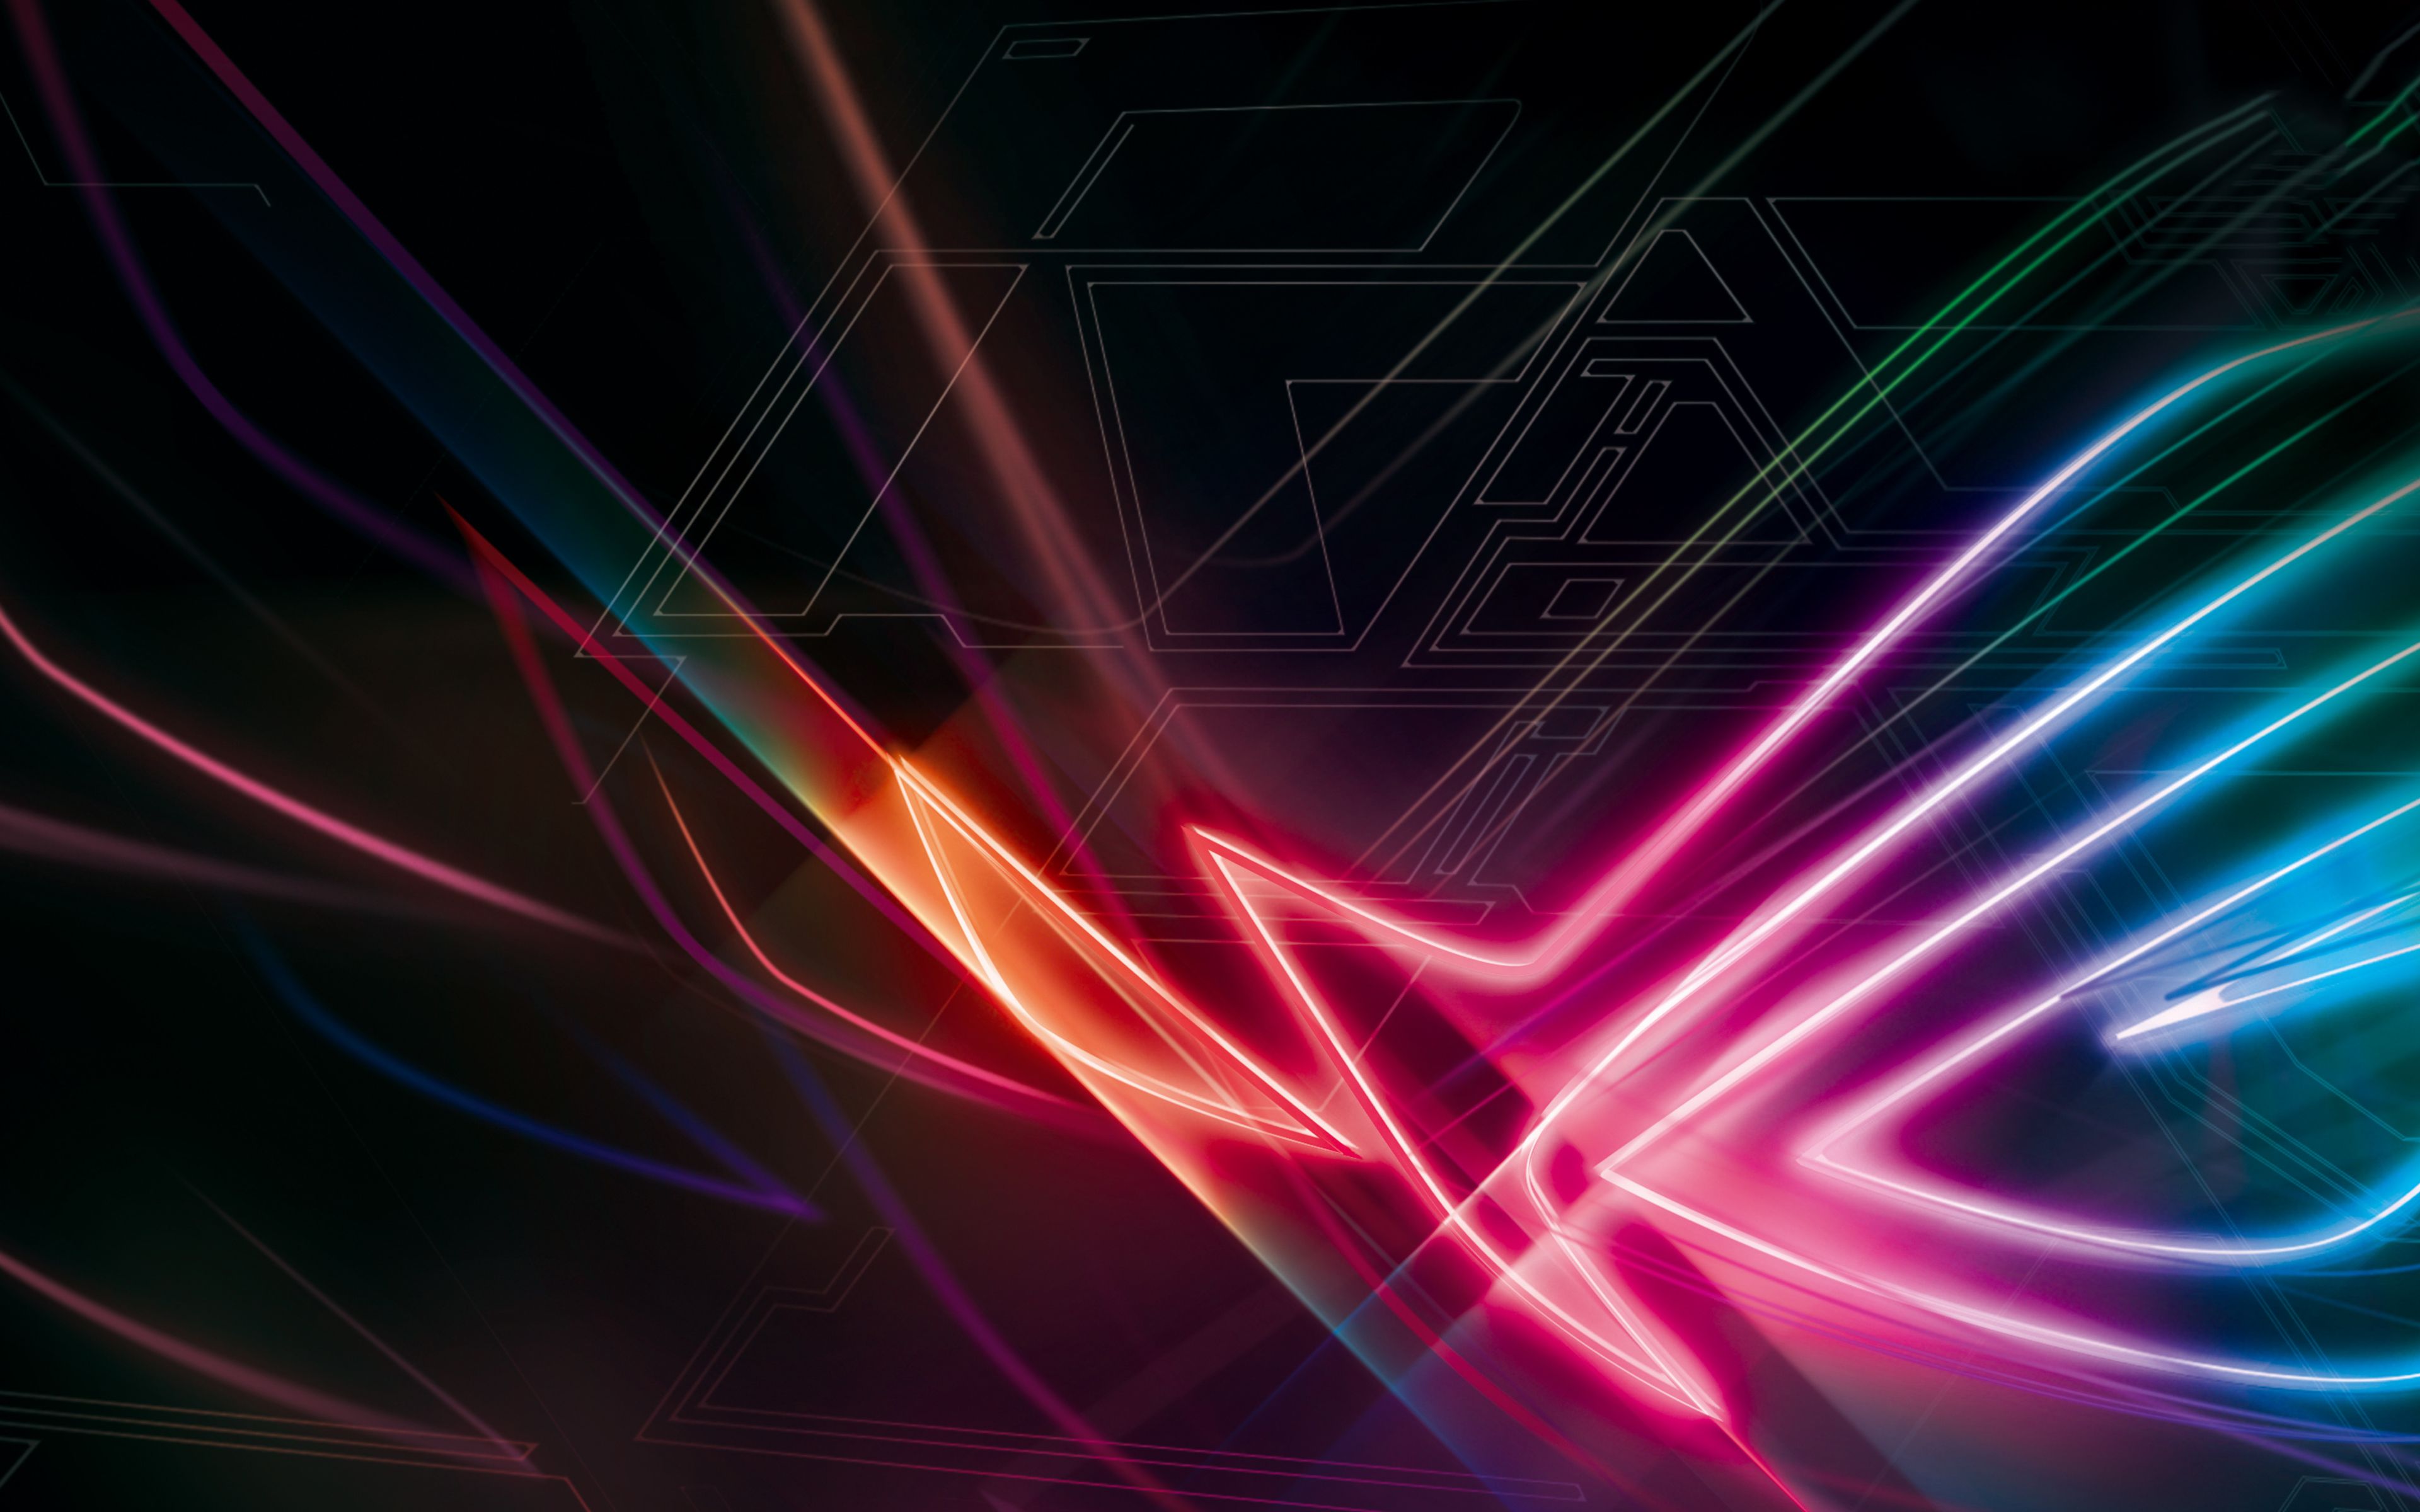 Download wallpaper Republic of Gamers, 4k, neon lights, RoG logo, ASUS, abstract logo, RoG, dark background for desktop with resolution 3840x2400. High Quality HD picture wallpaper